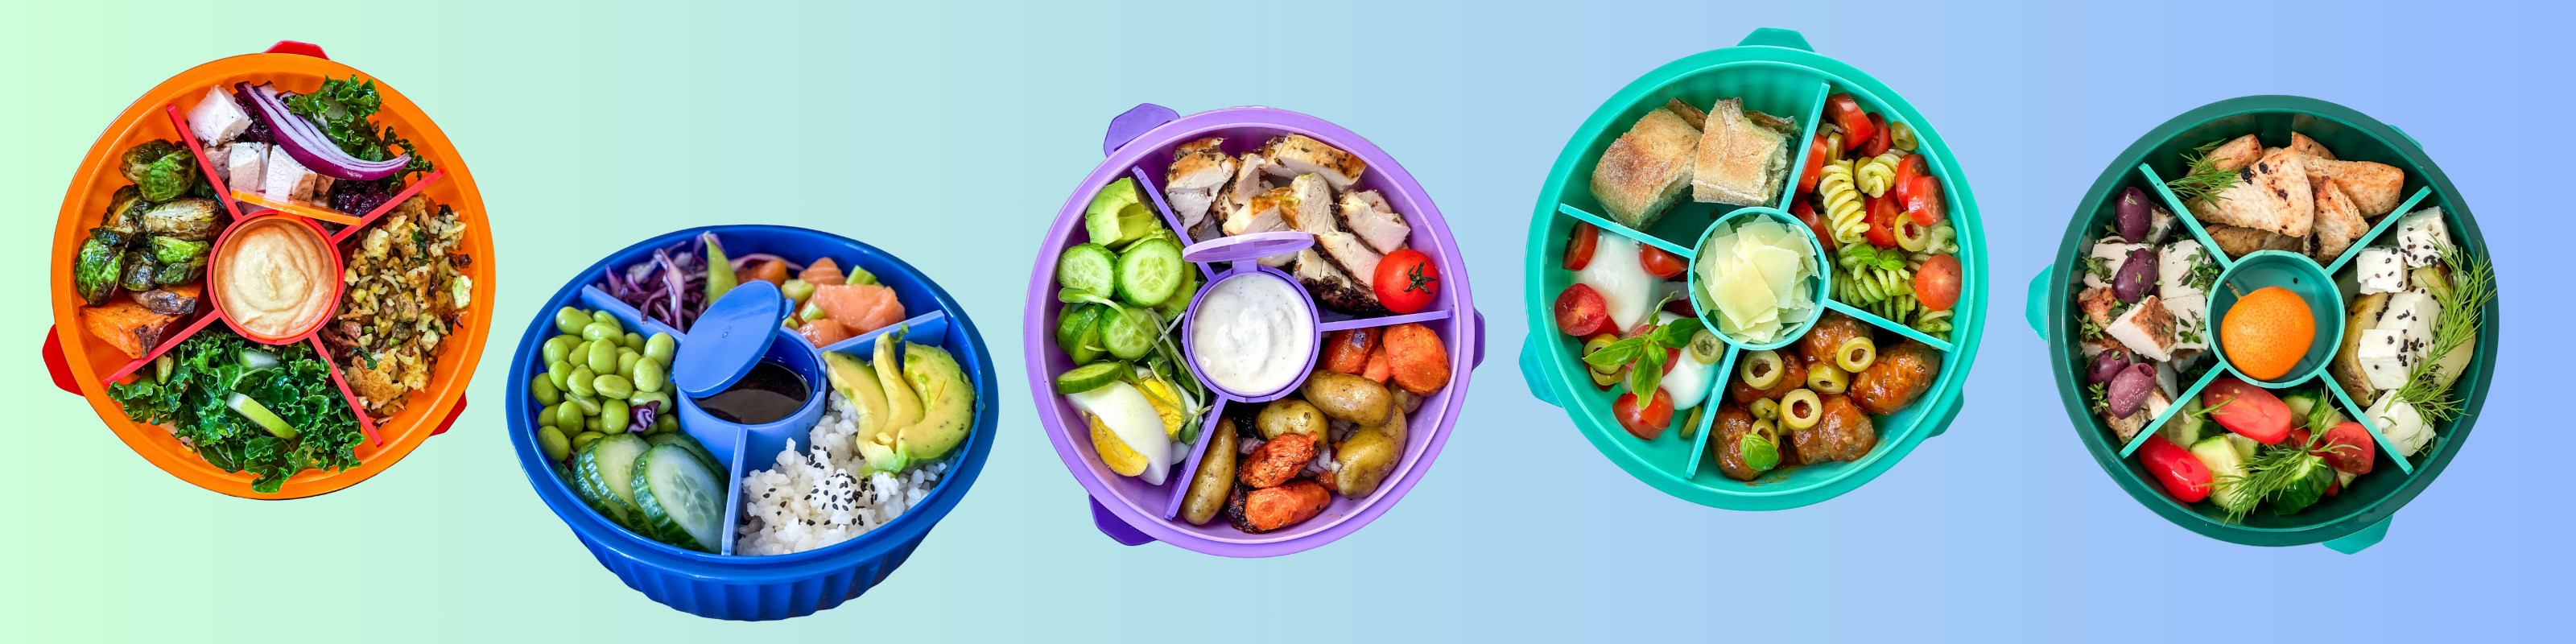 Thermal Food Jar for Hot Lunch - Yumbox Zuppa with Spoon and Band Neptune  Blue- 14oz